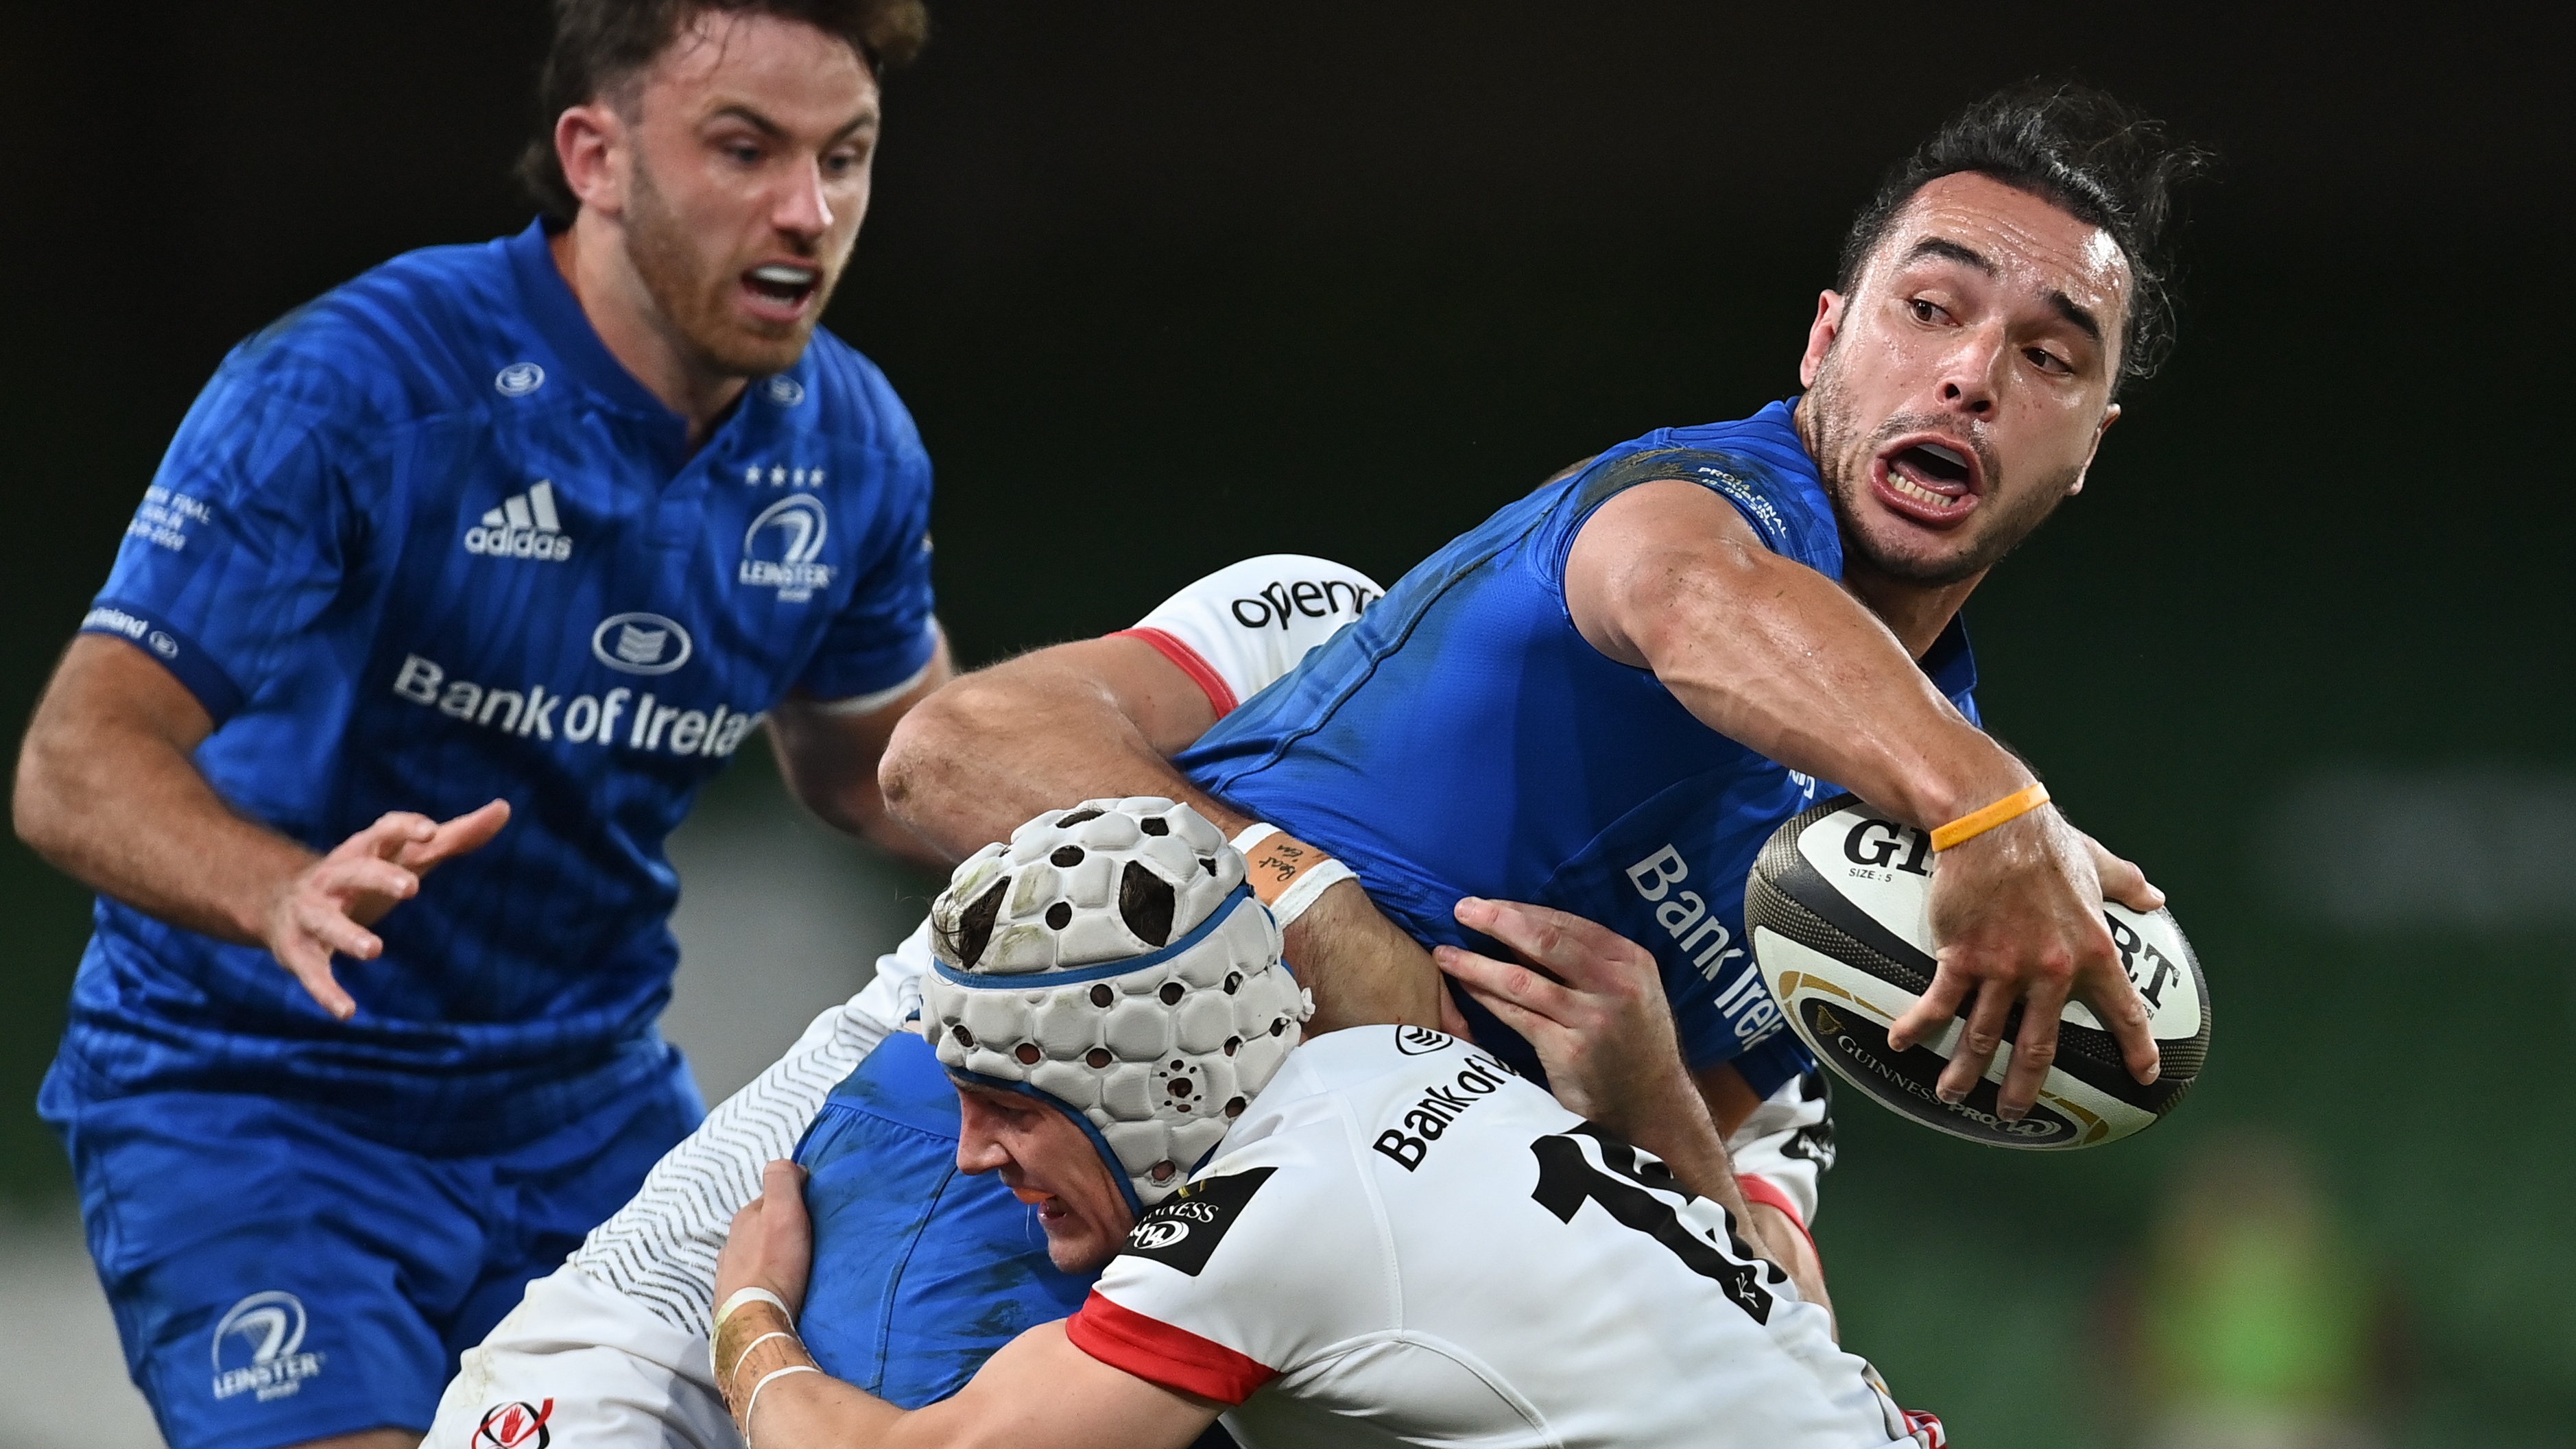 Ulster vs Leinster live stream how to watch Pro14 rugby online from anywhere today TechRadar